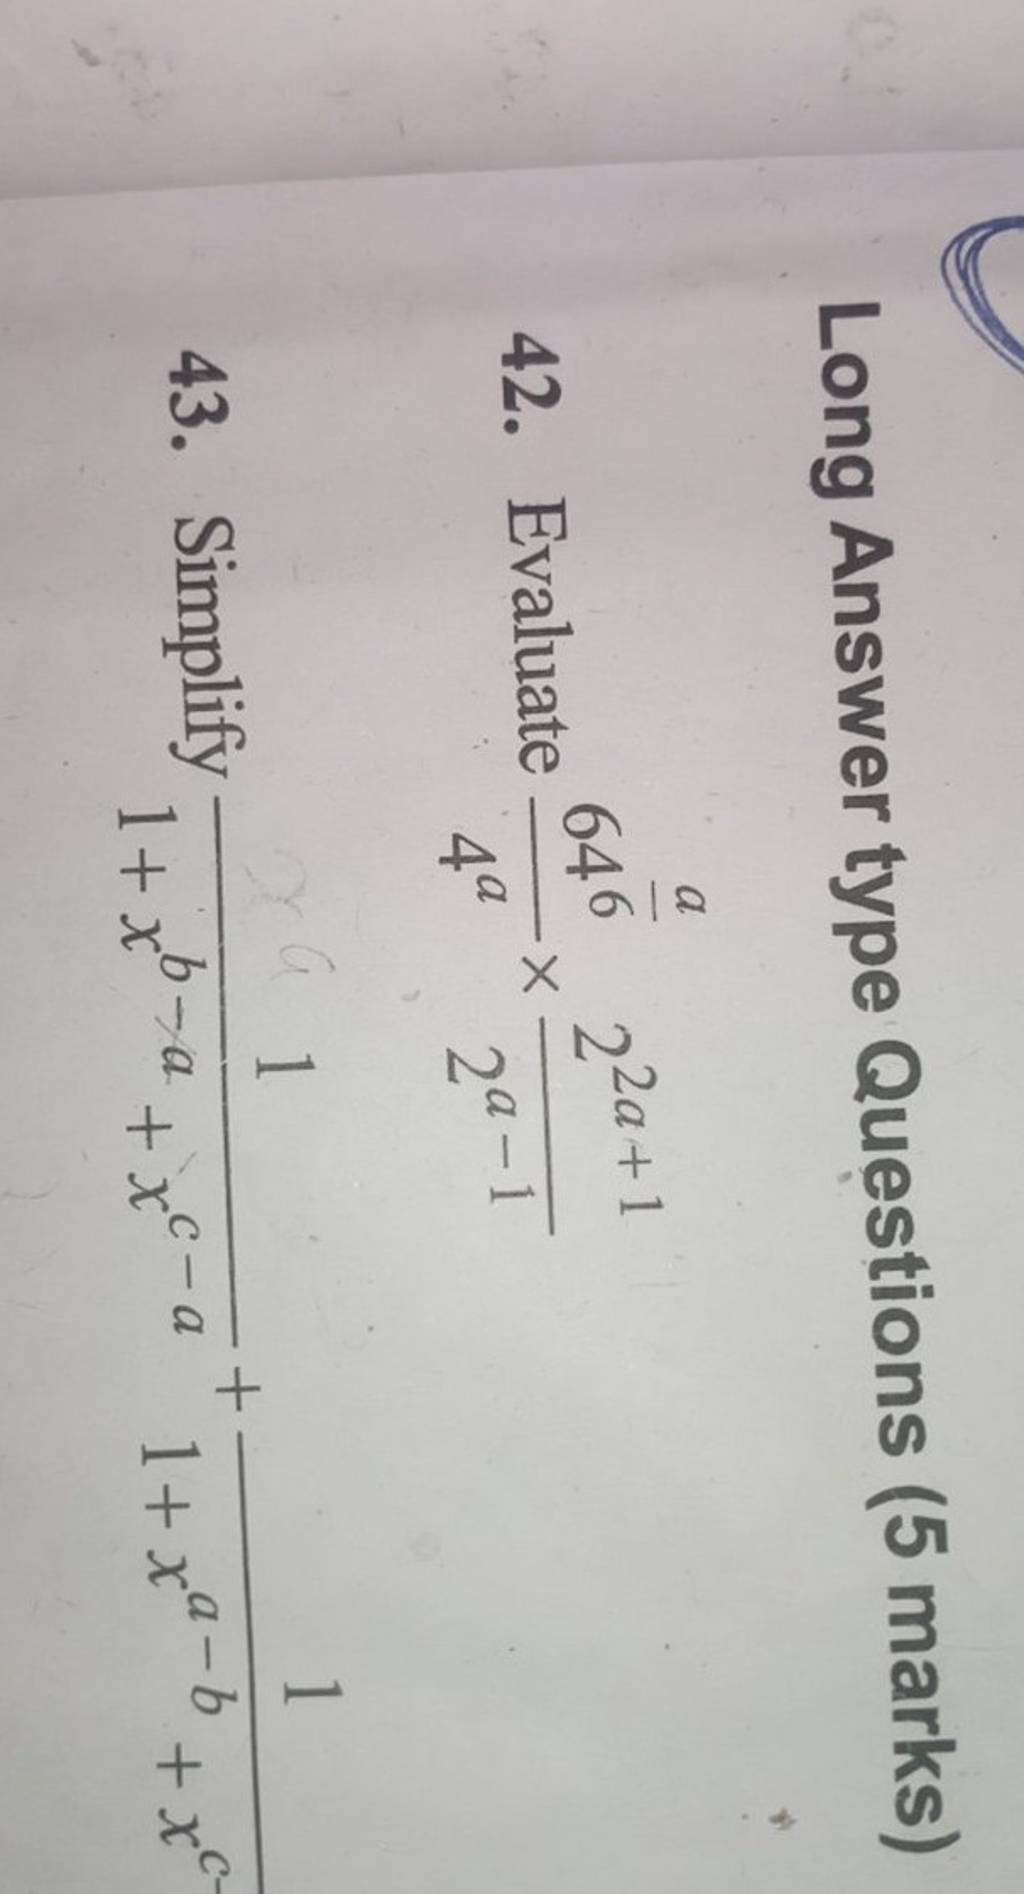 Long Answer type Questions (5 marks)
42. Evaluate 4a646a​​×2a−122a+1​
